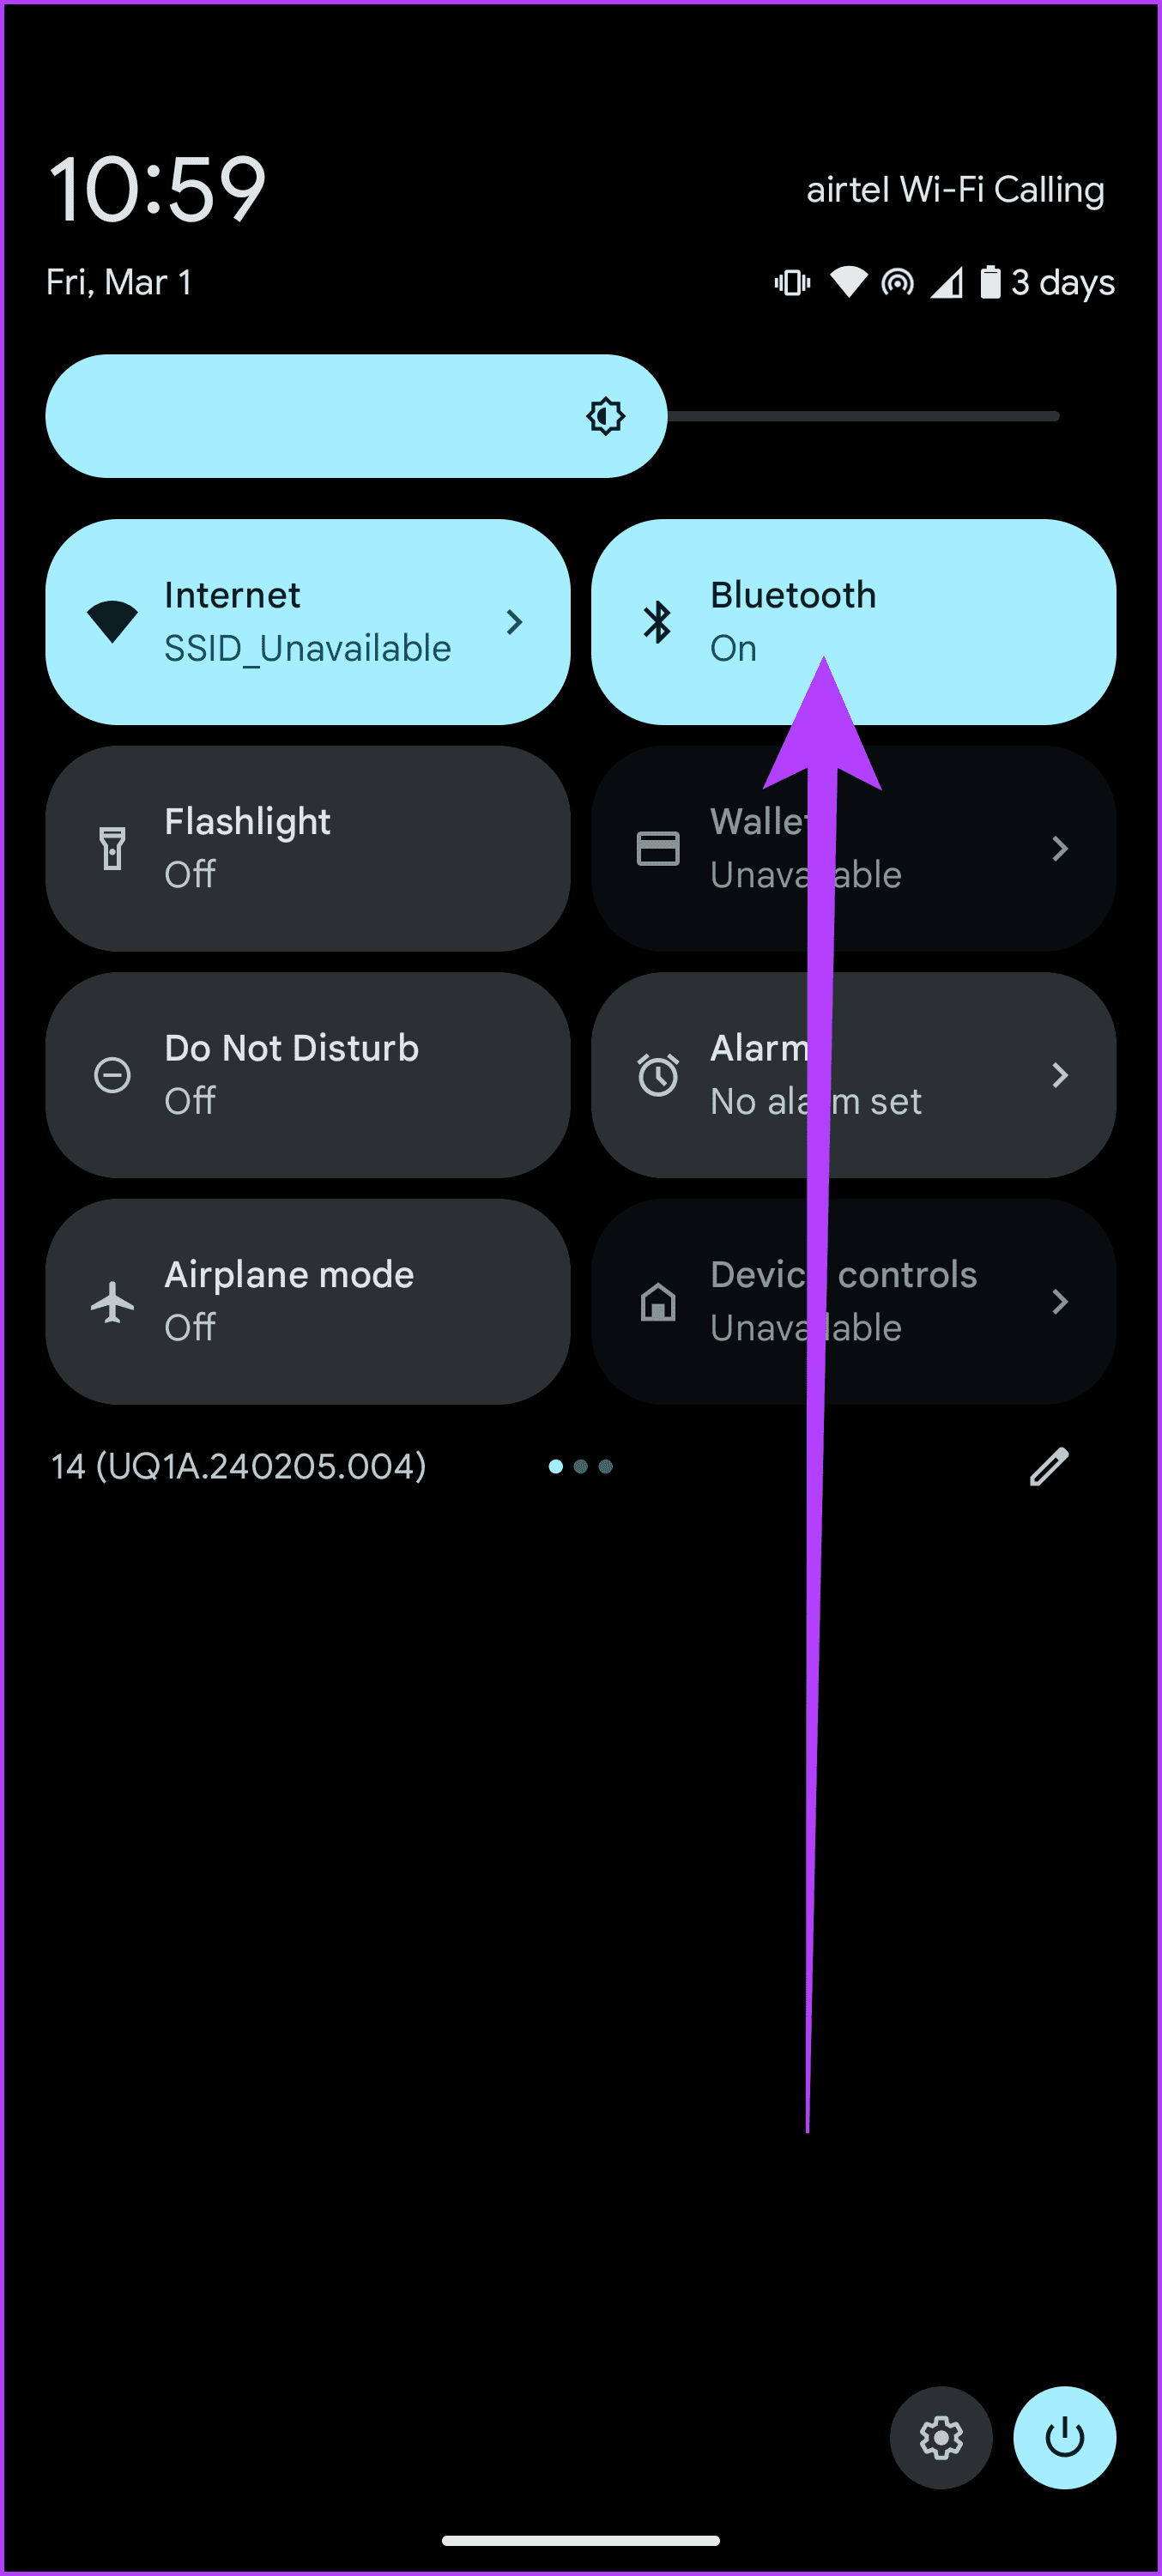 1.2 swipe down from the top of the screen to access the Quick Settings panel and tap the Bluetooth icon to turn it on